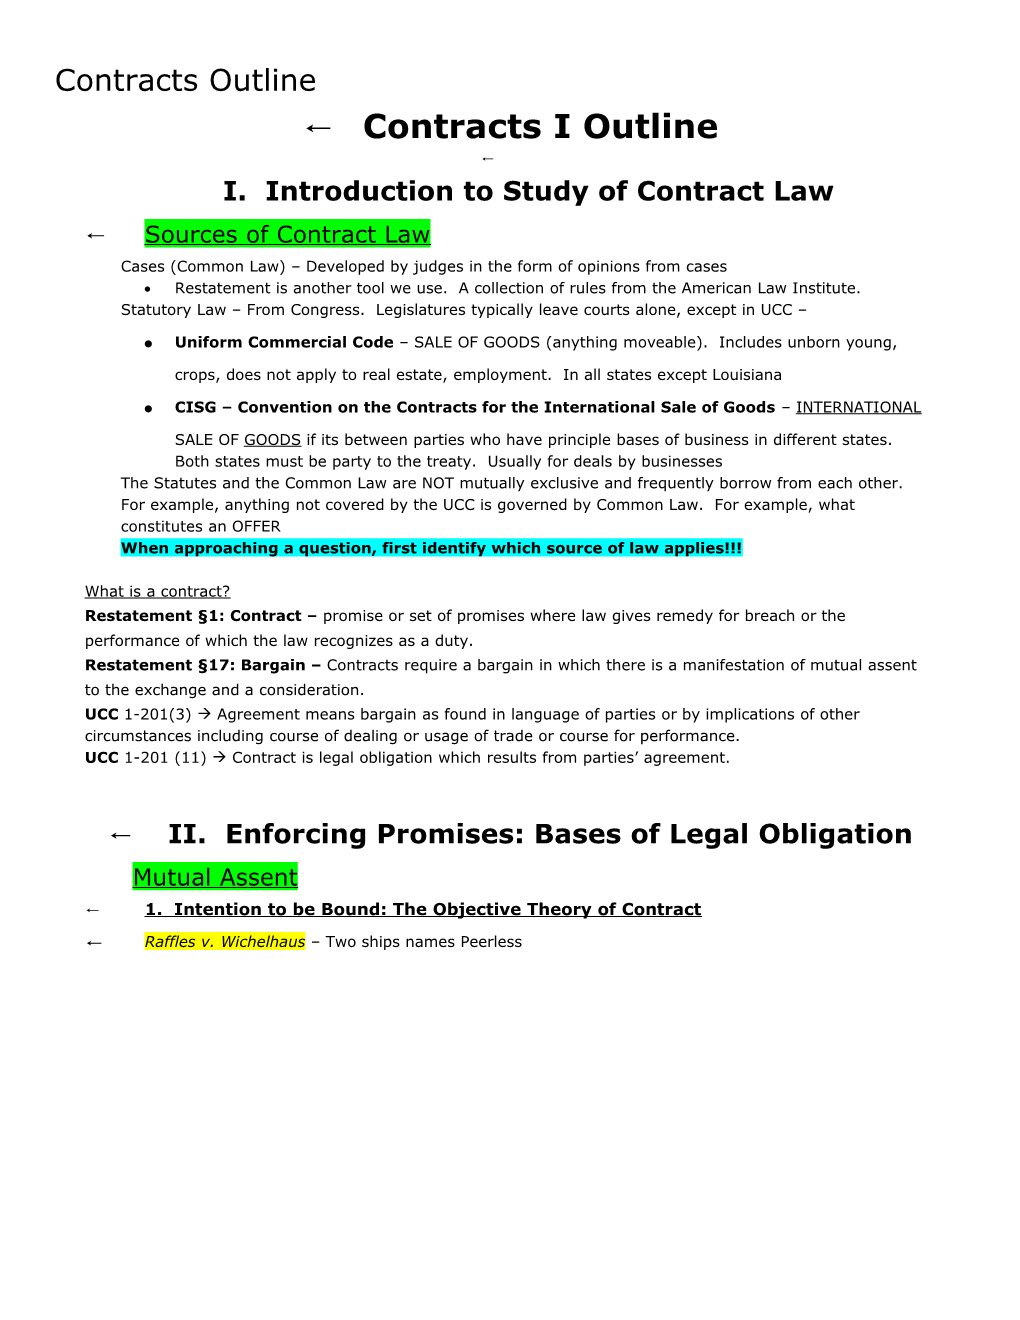 I. Introduction to Study of Contract Law